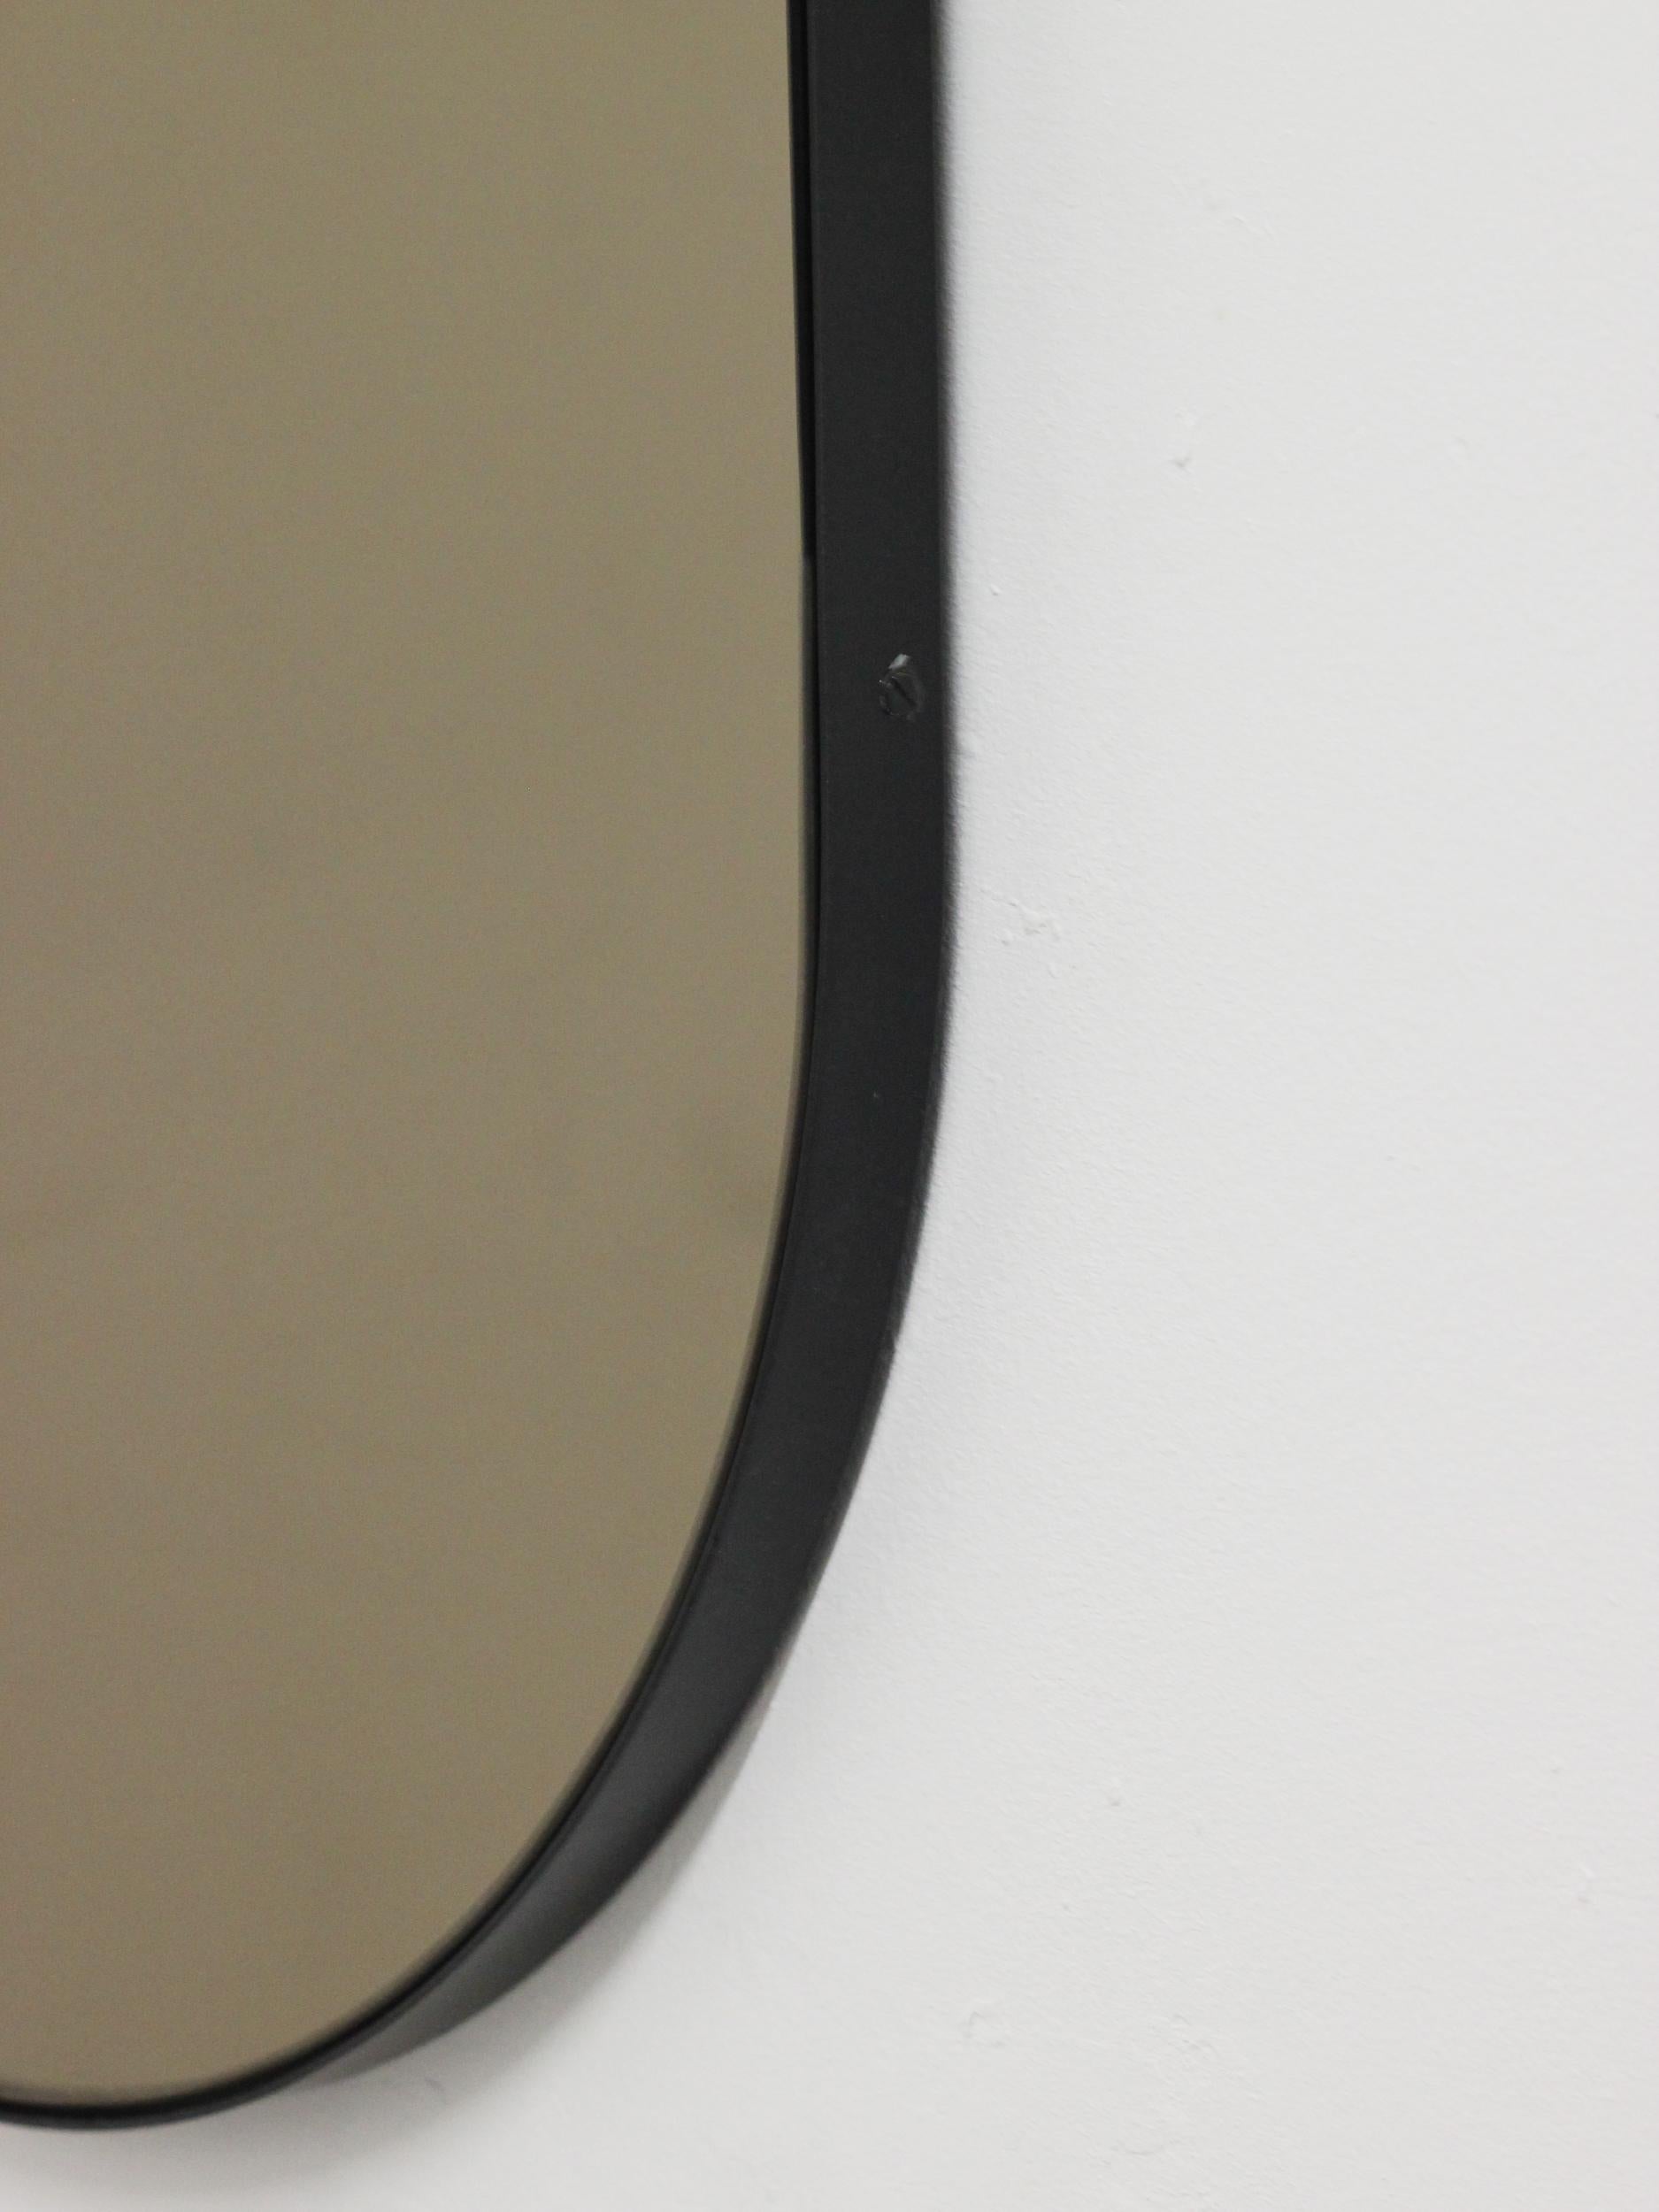 British Capsula Capsule shaped Bronze Contemporary Mirror with Black Frame, Small For Sale